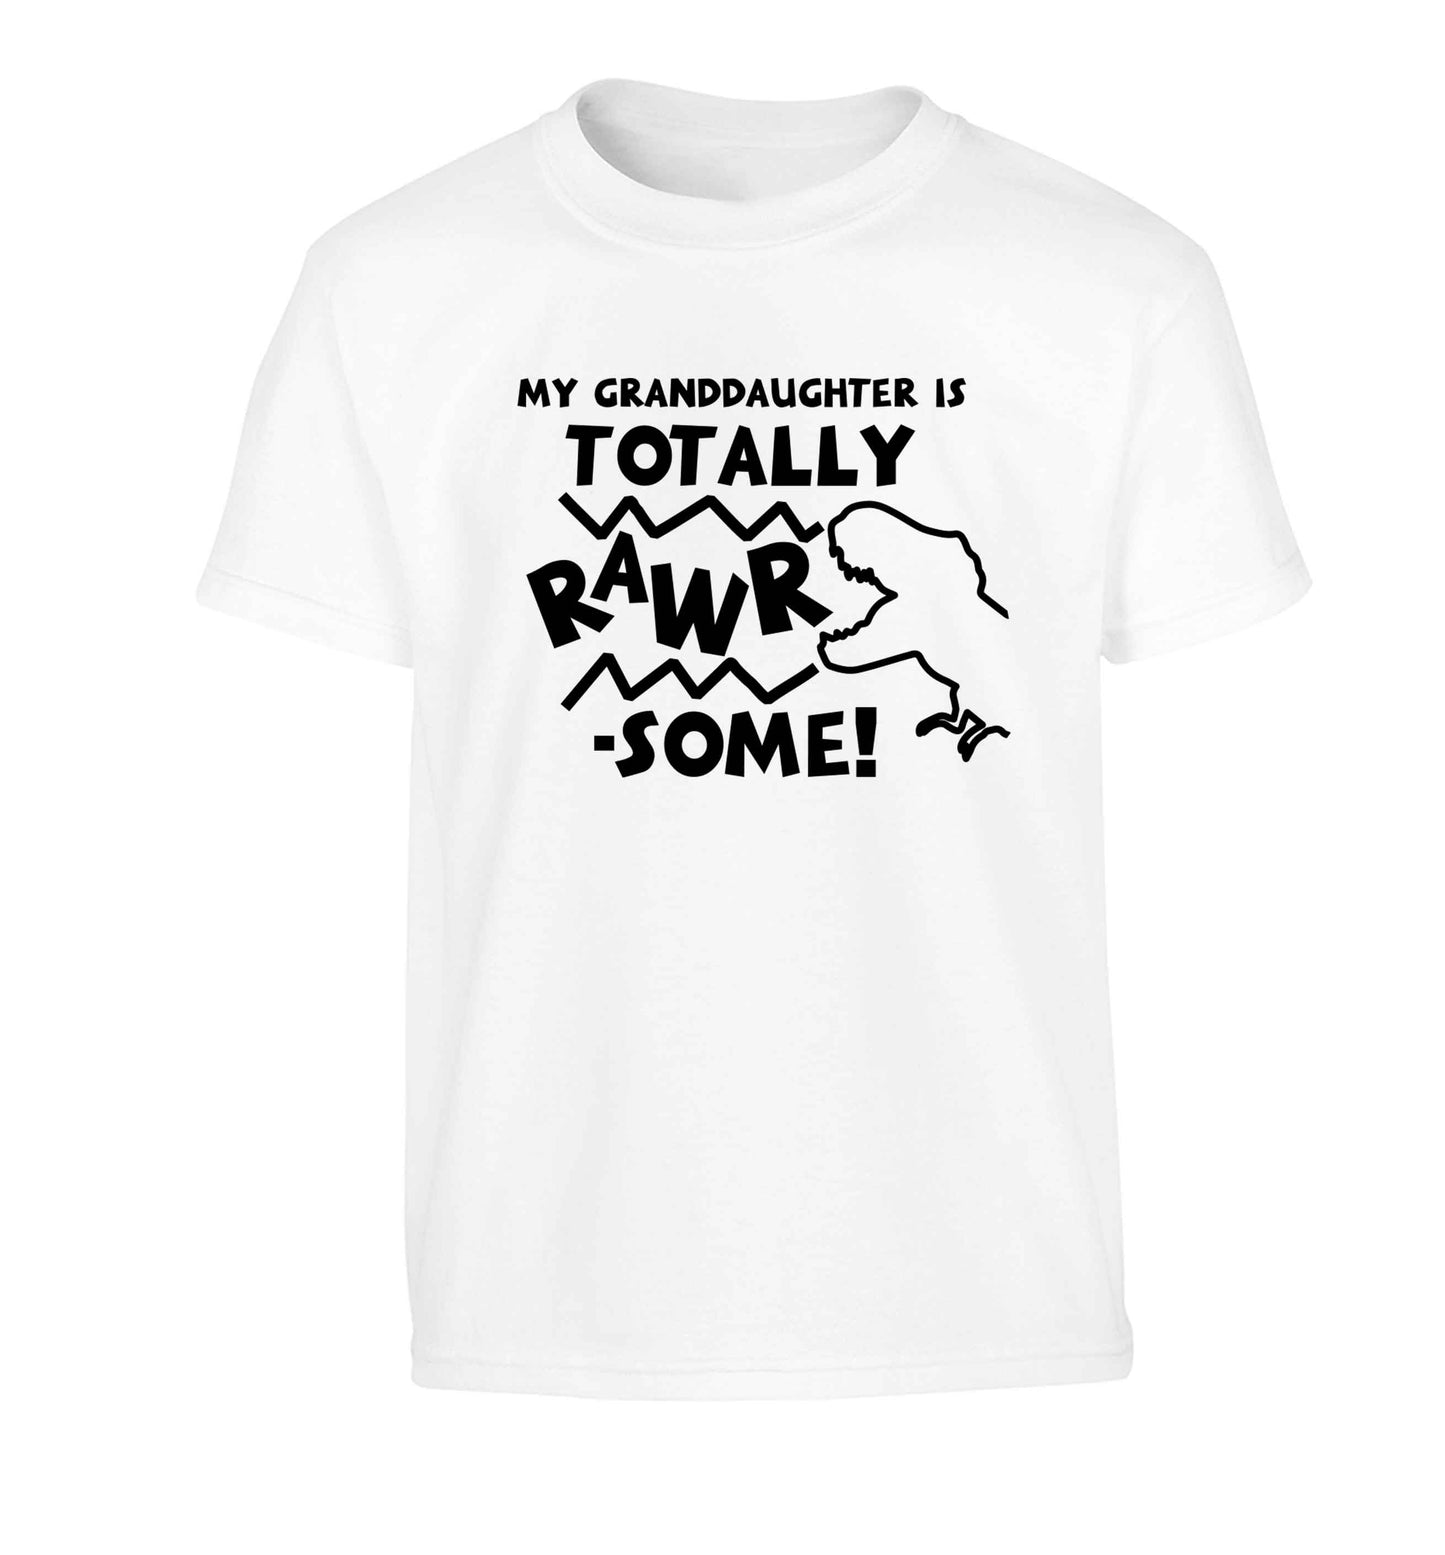 My granddaughter is totally rawrsome Children's white Tshirt 12-13 Years